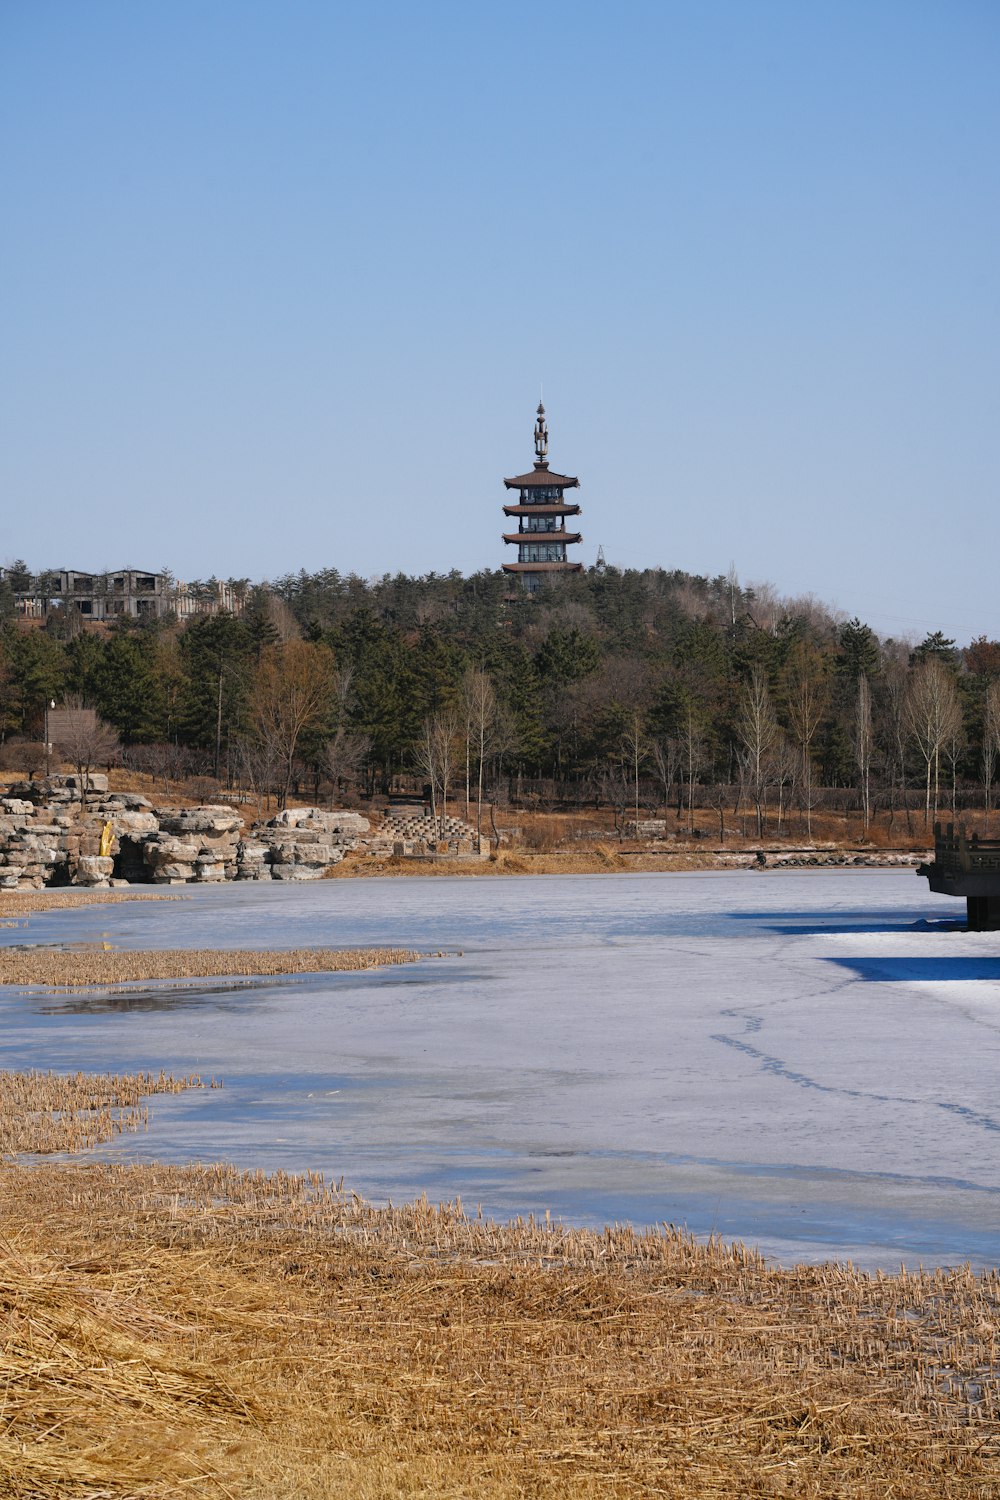 a tall tower sitting on top of a hill next to a body of water